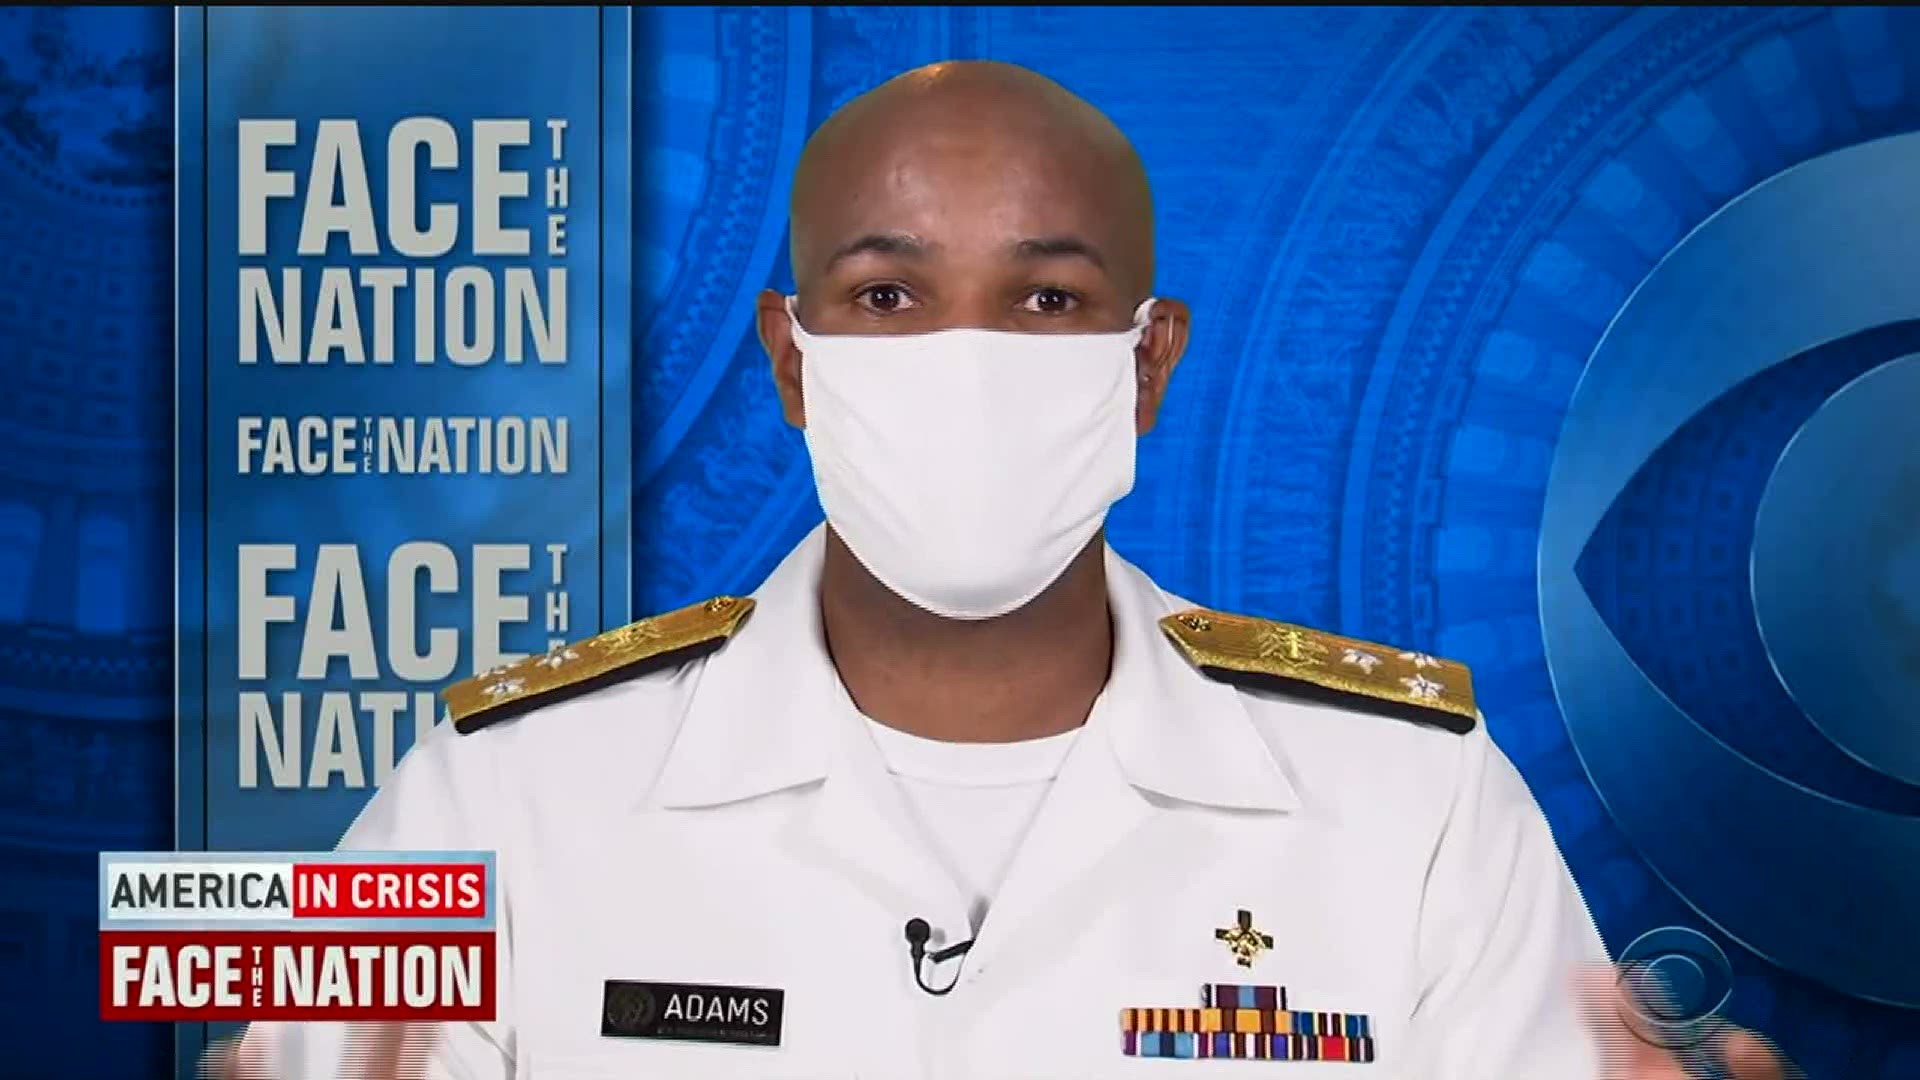 US Surgeon General Jerome Adams on Sunday said a mask mandate would work best at local and state levels, casting doubt on how a national mandate would be enforced.